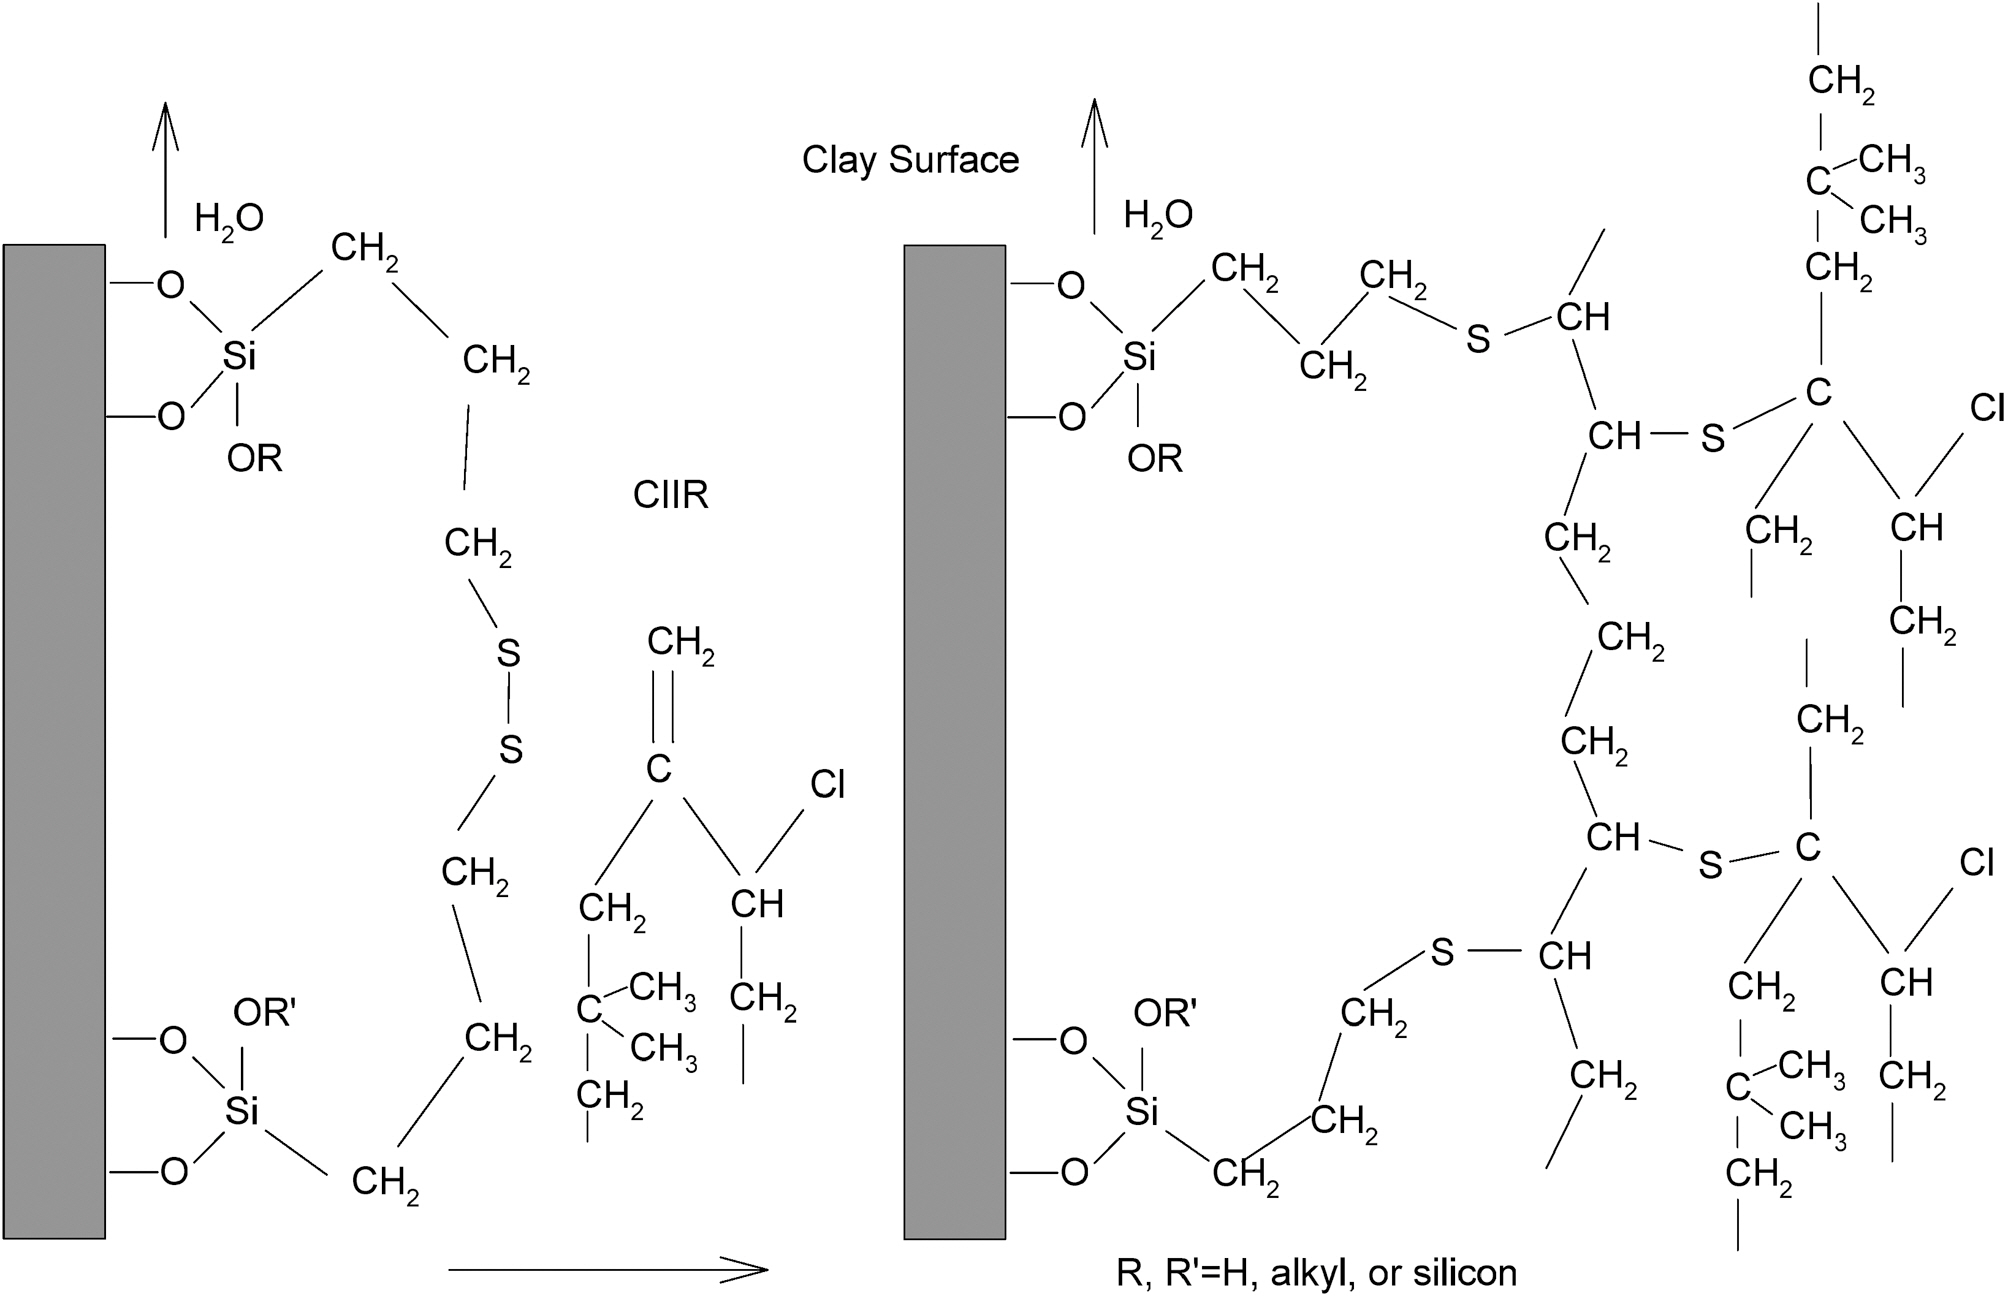 Clay-TESPD-CIIR 3-dimensional structure after vulcanization.